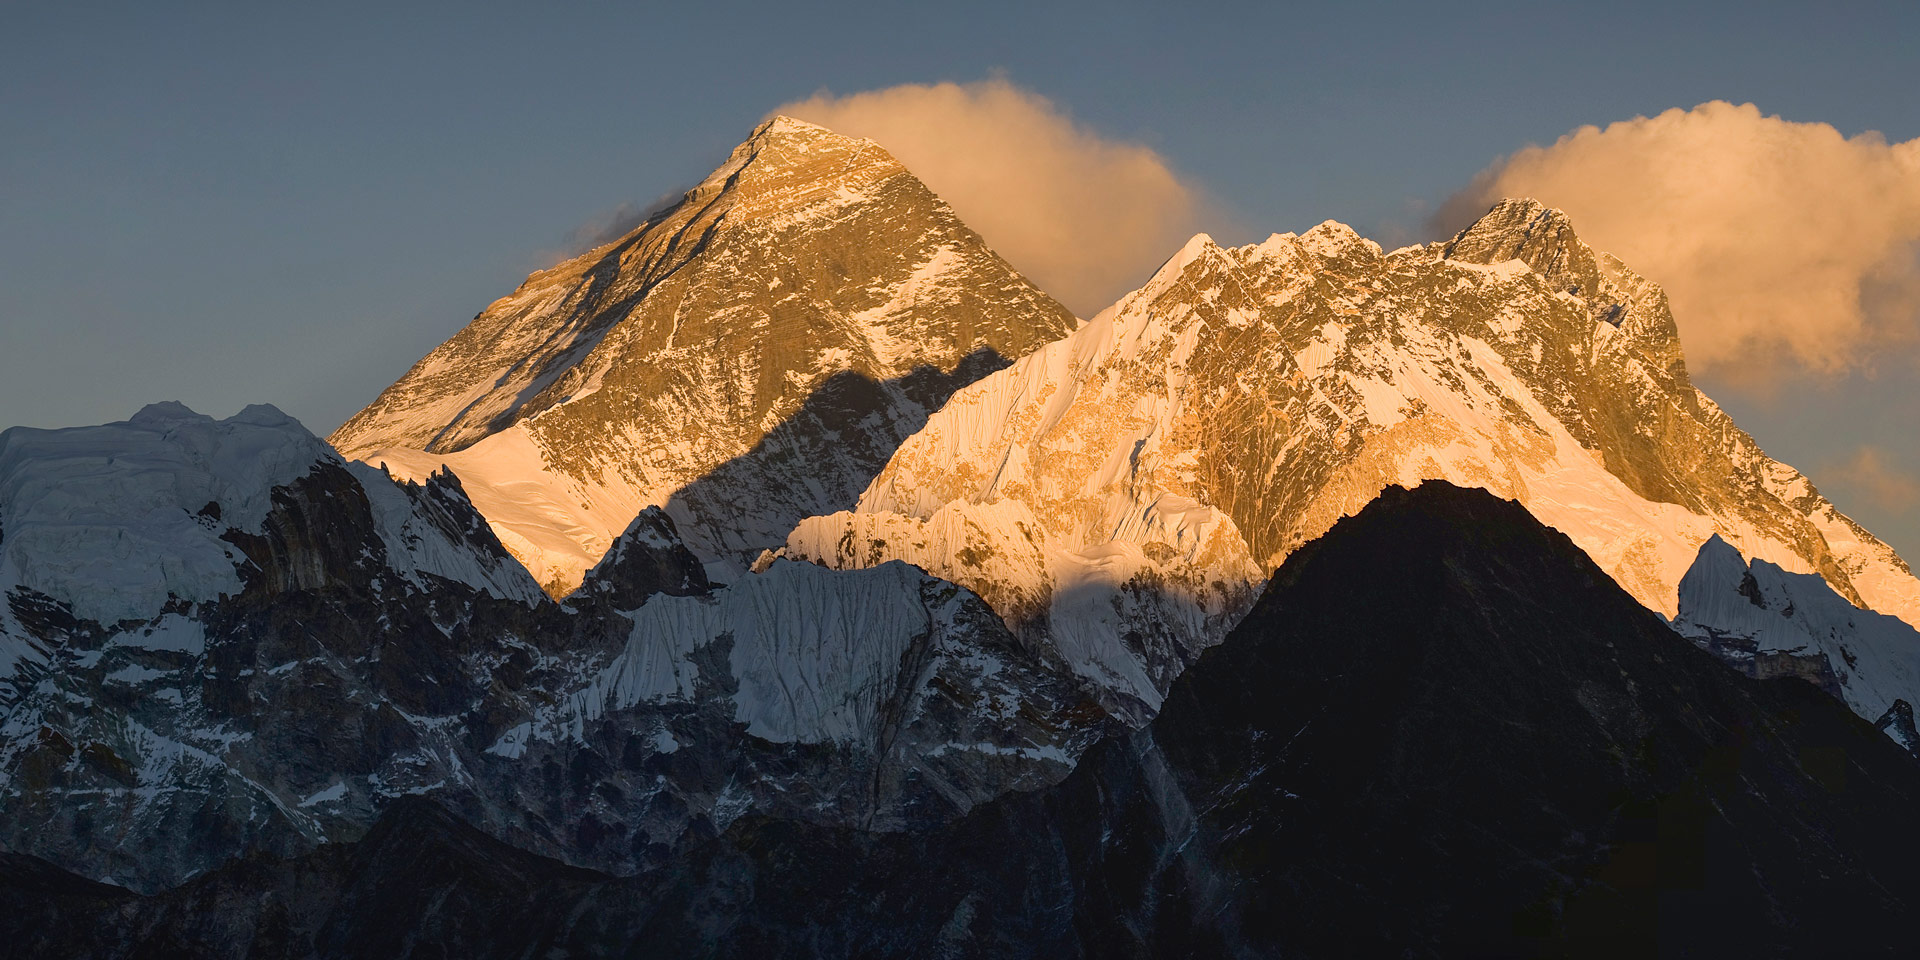 Everest, Lhotse and Nuptse View from the top of Gokyo Ri in the Khumbu region of Nepal